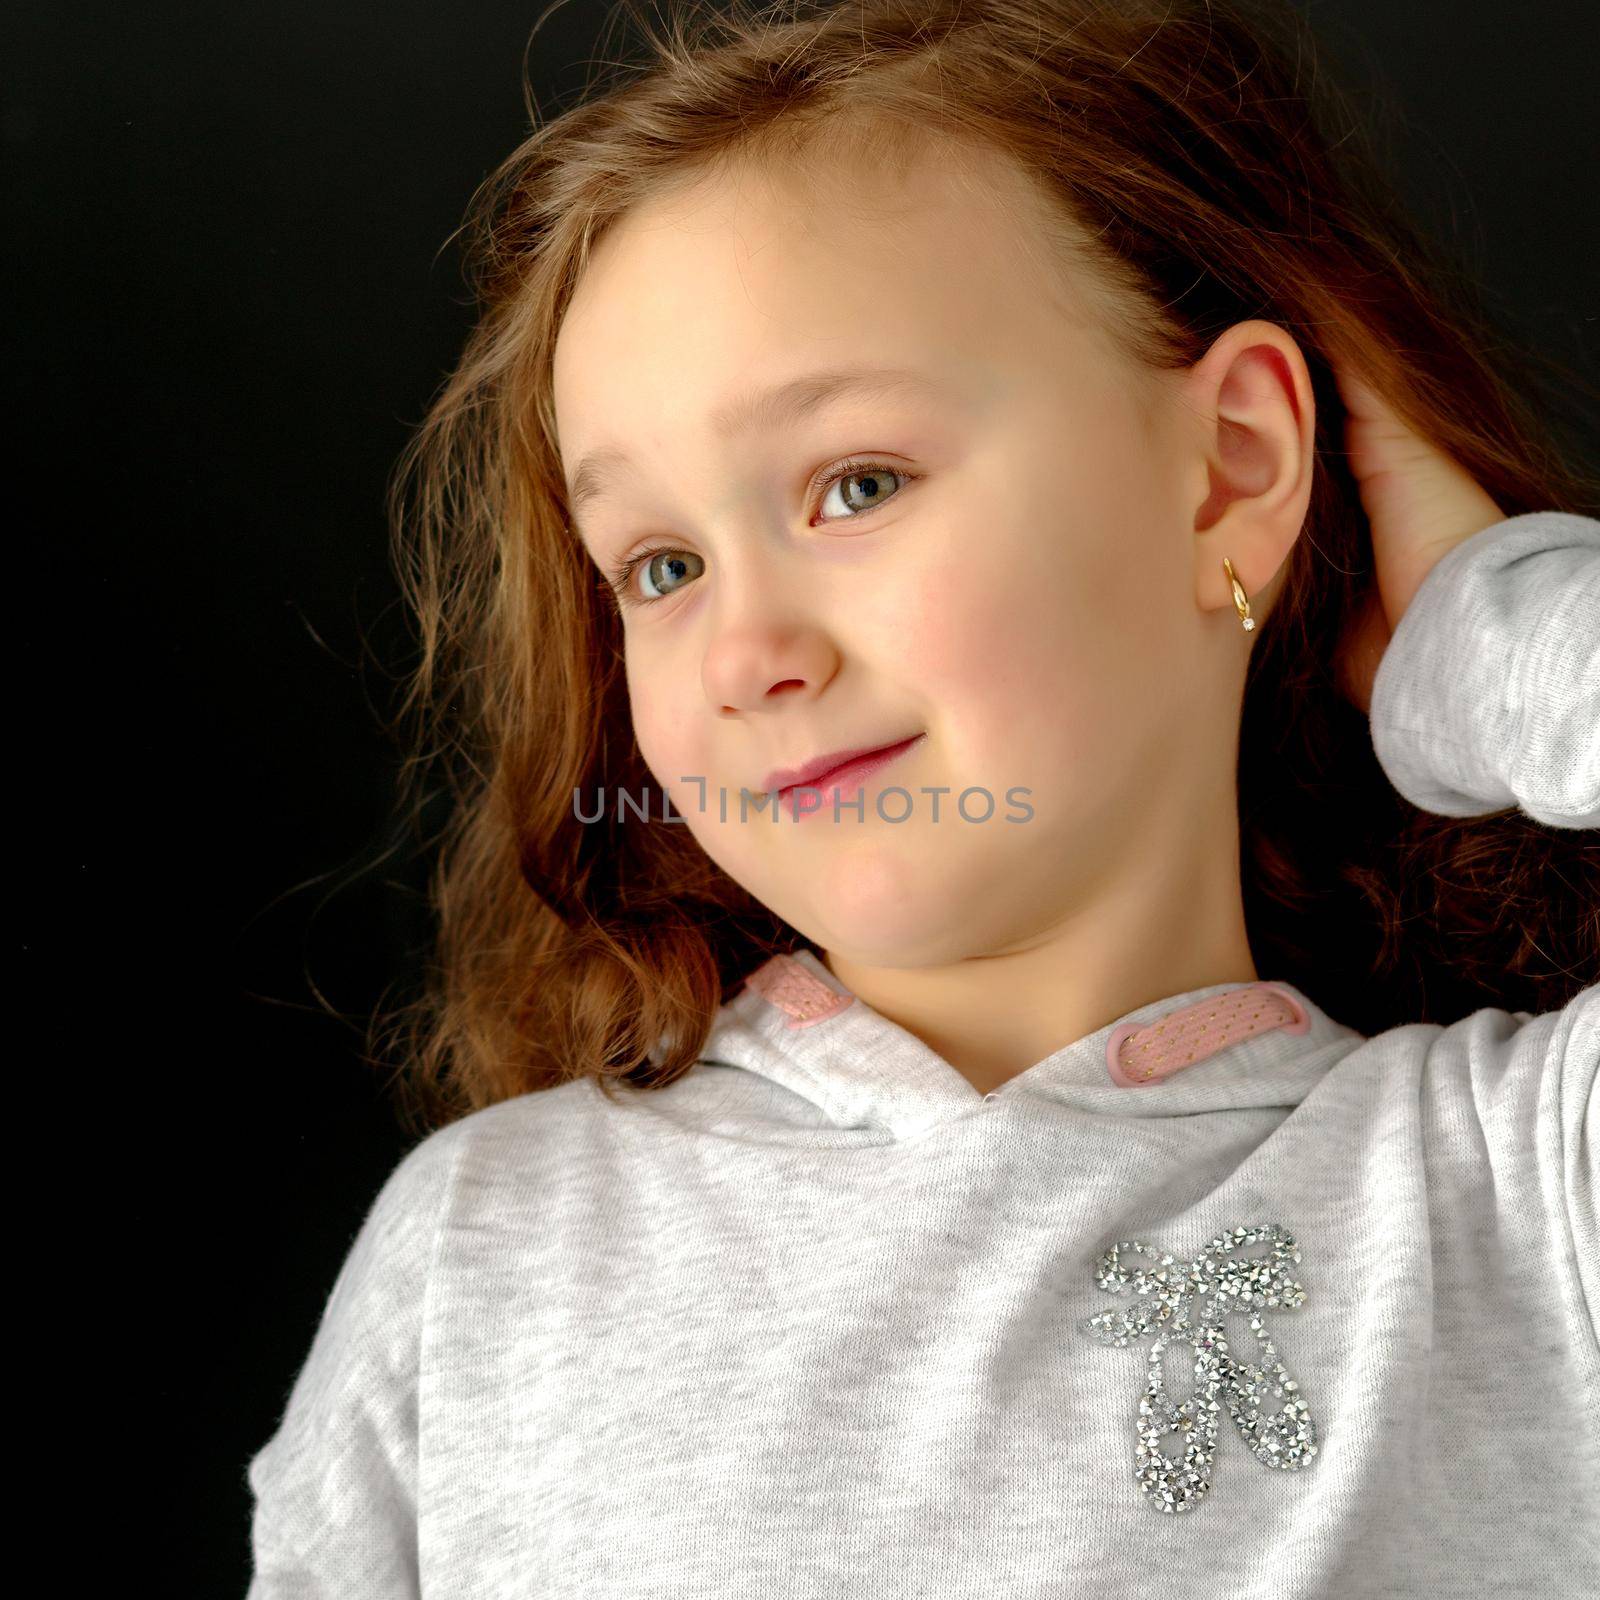 A beautiful little girl straightens her hair on her head. The concept of beauty and fashion, photo on the cover of the magazine.Studio portrait on black background.